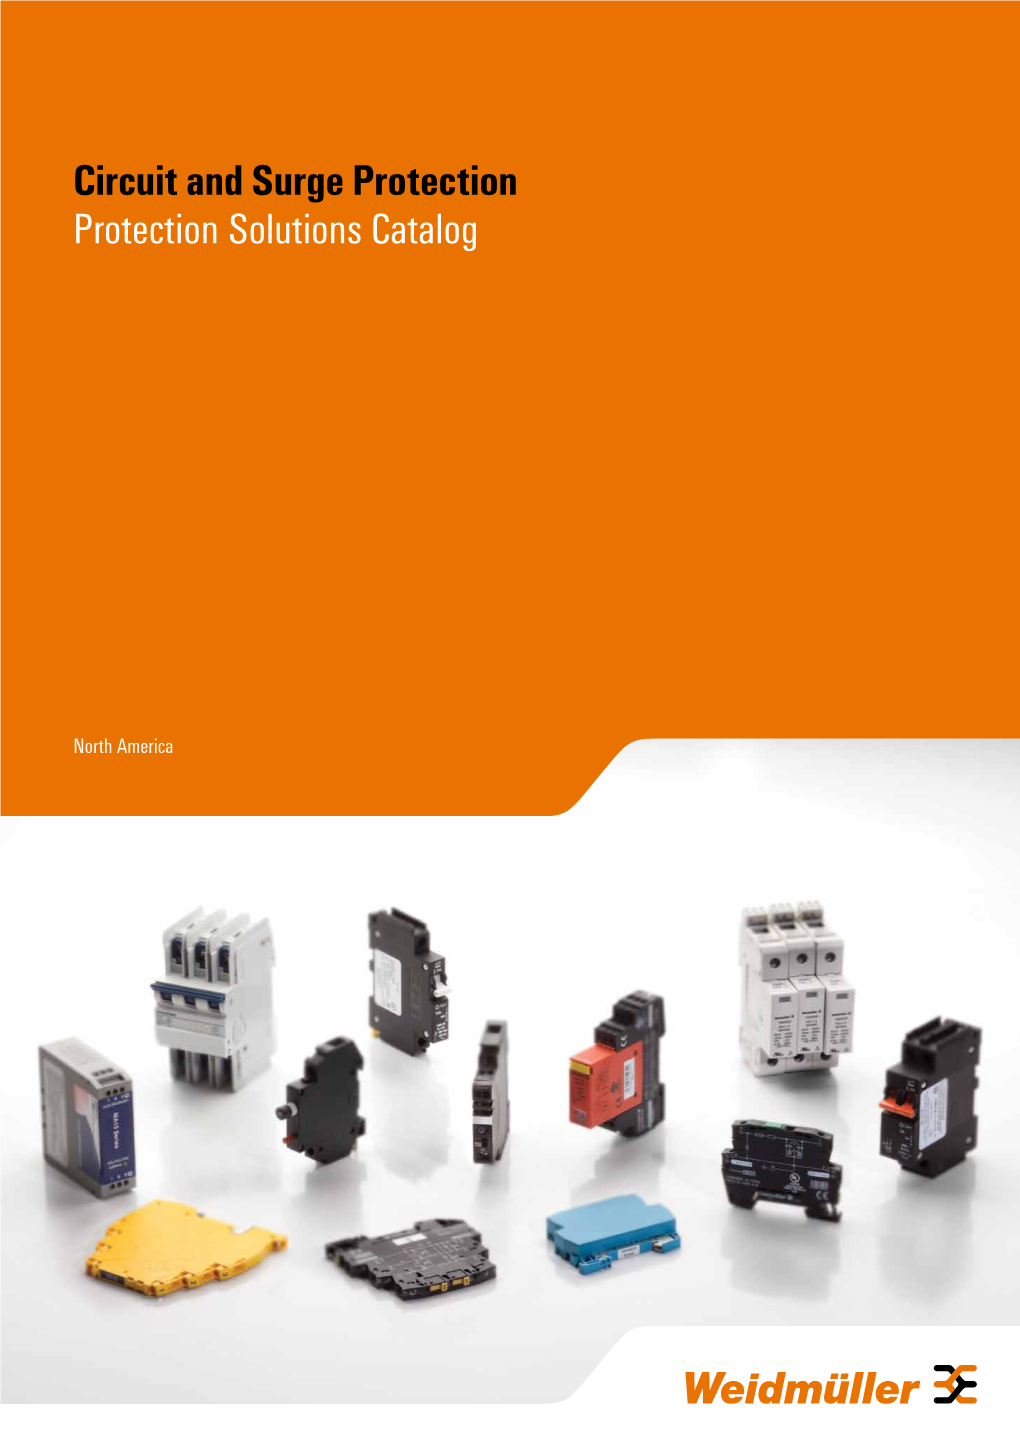 Circuit and Surge Protection Protection Solutions Catalog